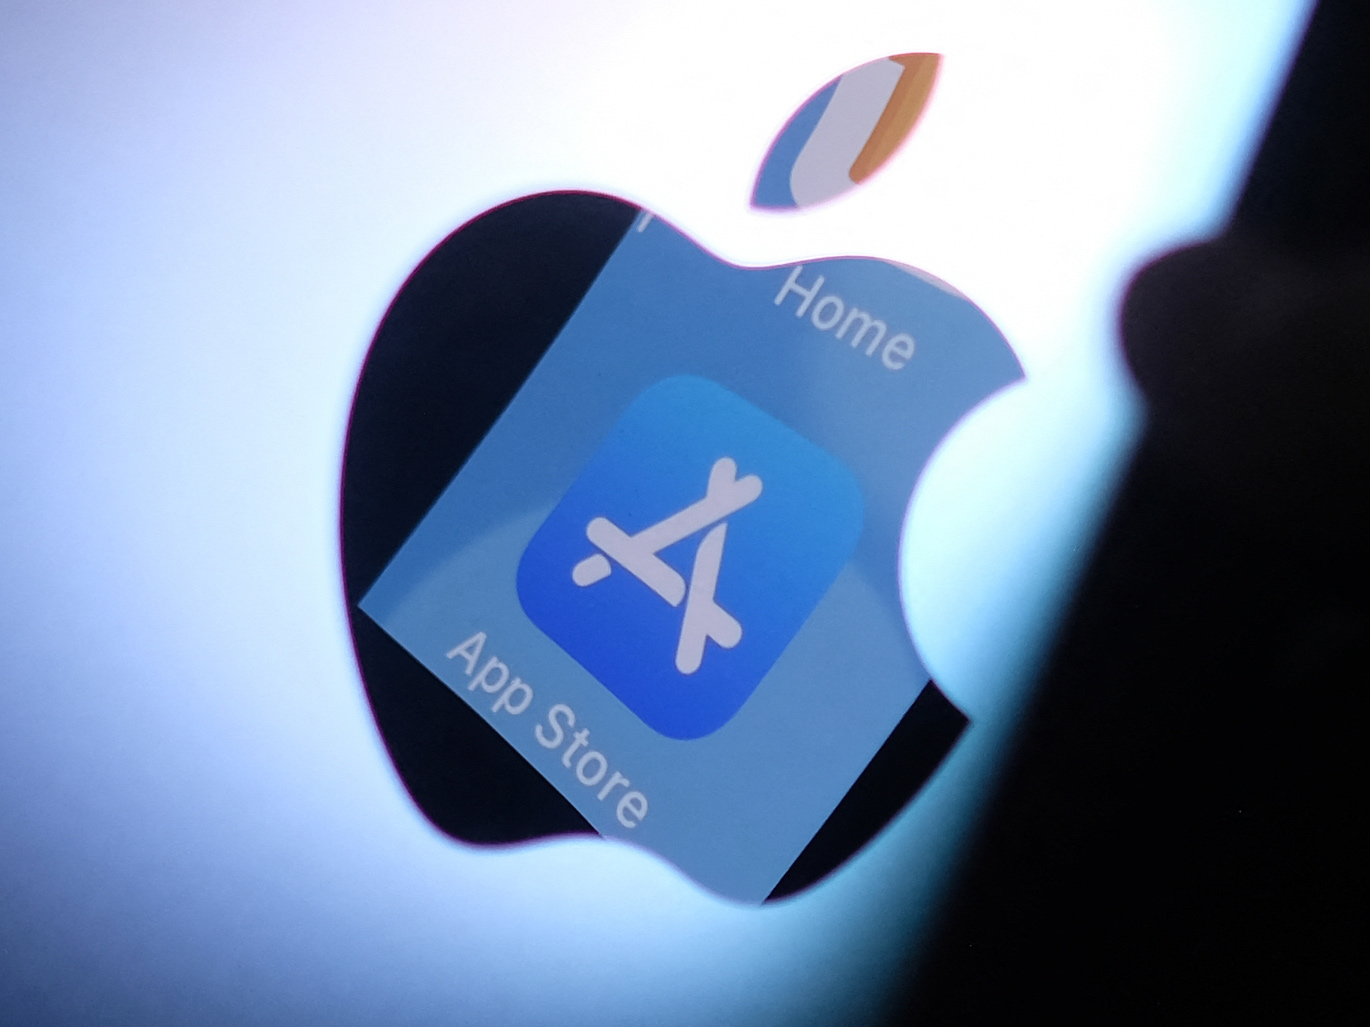 Even Apple's ex-head of app reviews says App Store is unfair to